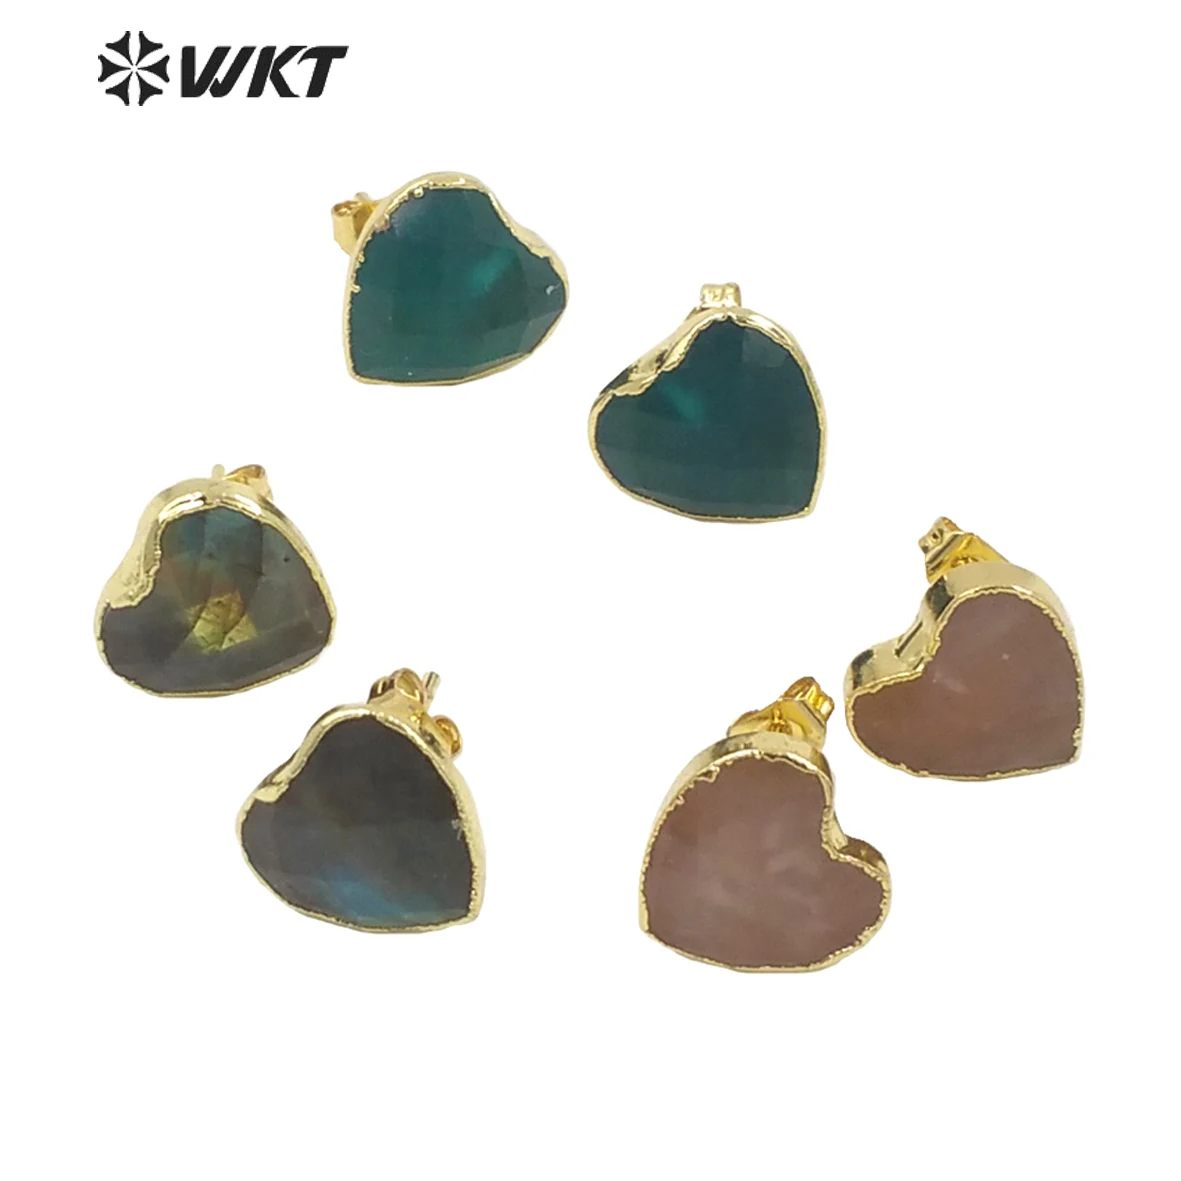 

WT-E649 Flashing Cute Gold Electroplated Heart Shape Natural Gem Stone Gorgeous Studs Earrings 2021 Hot Trend Christmas Gift